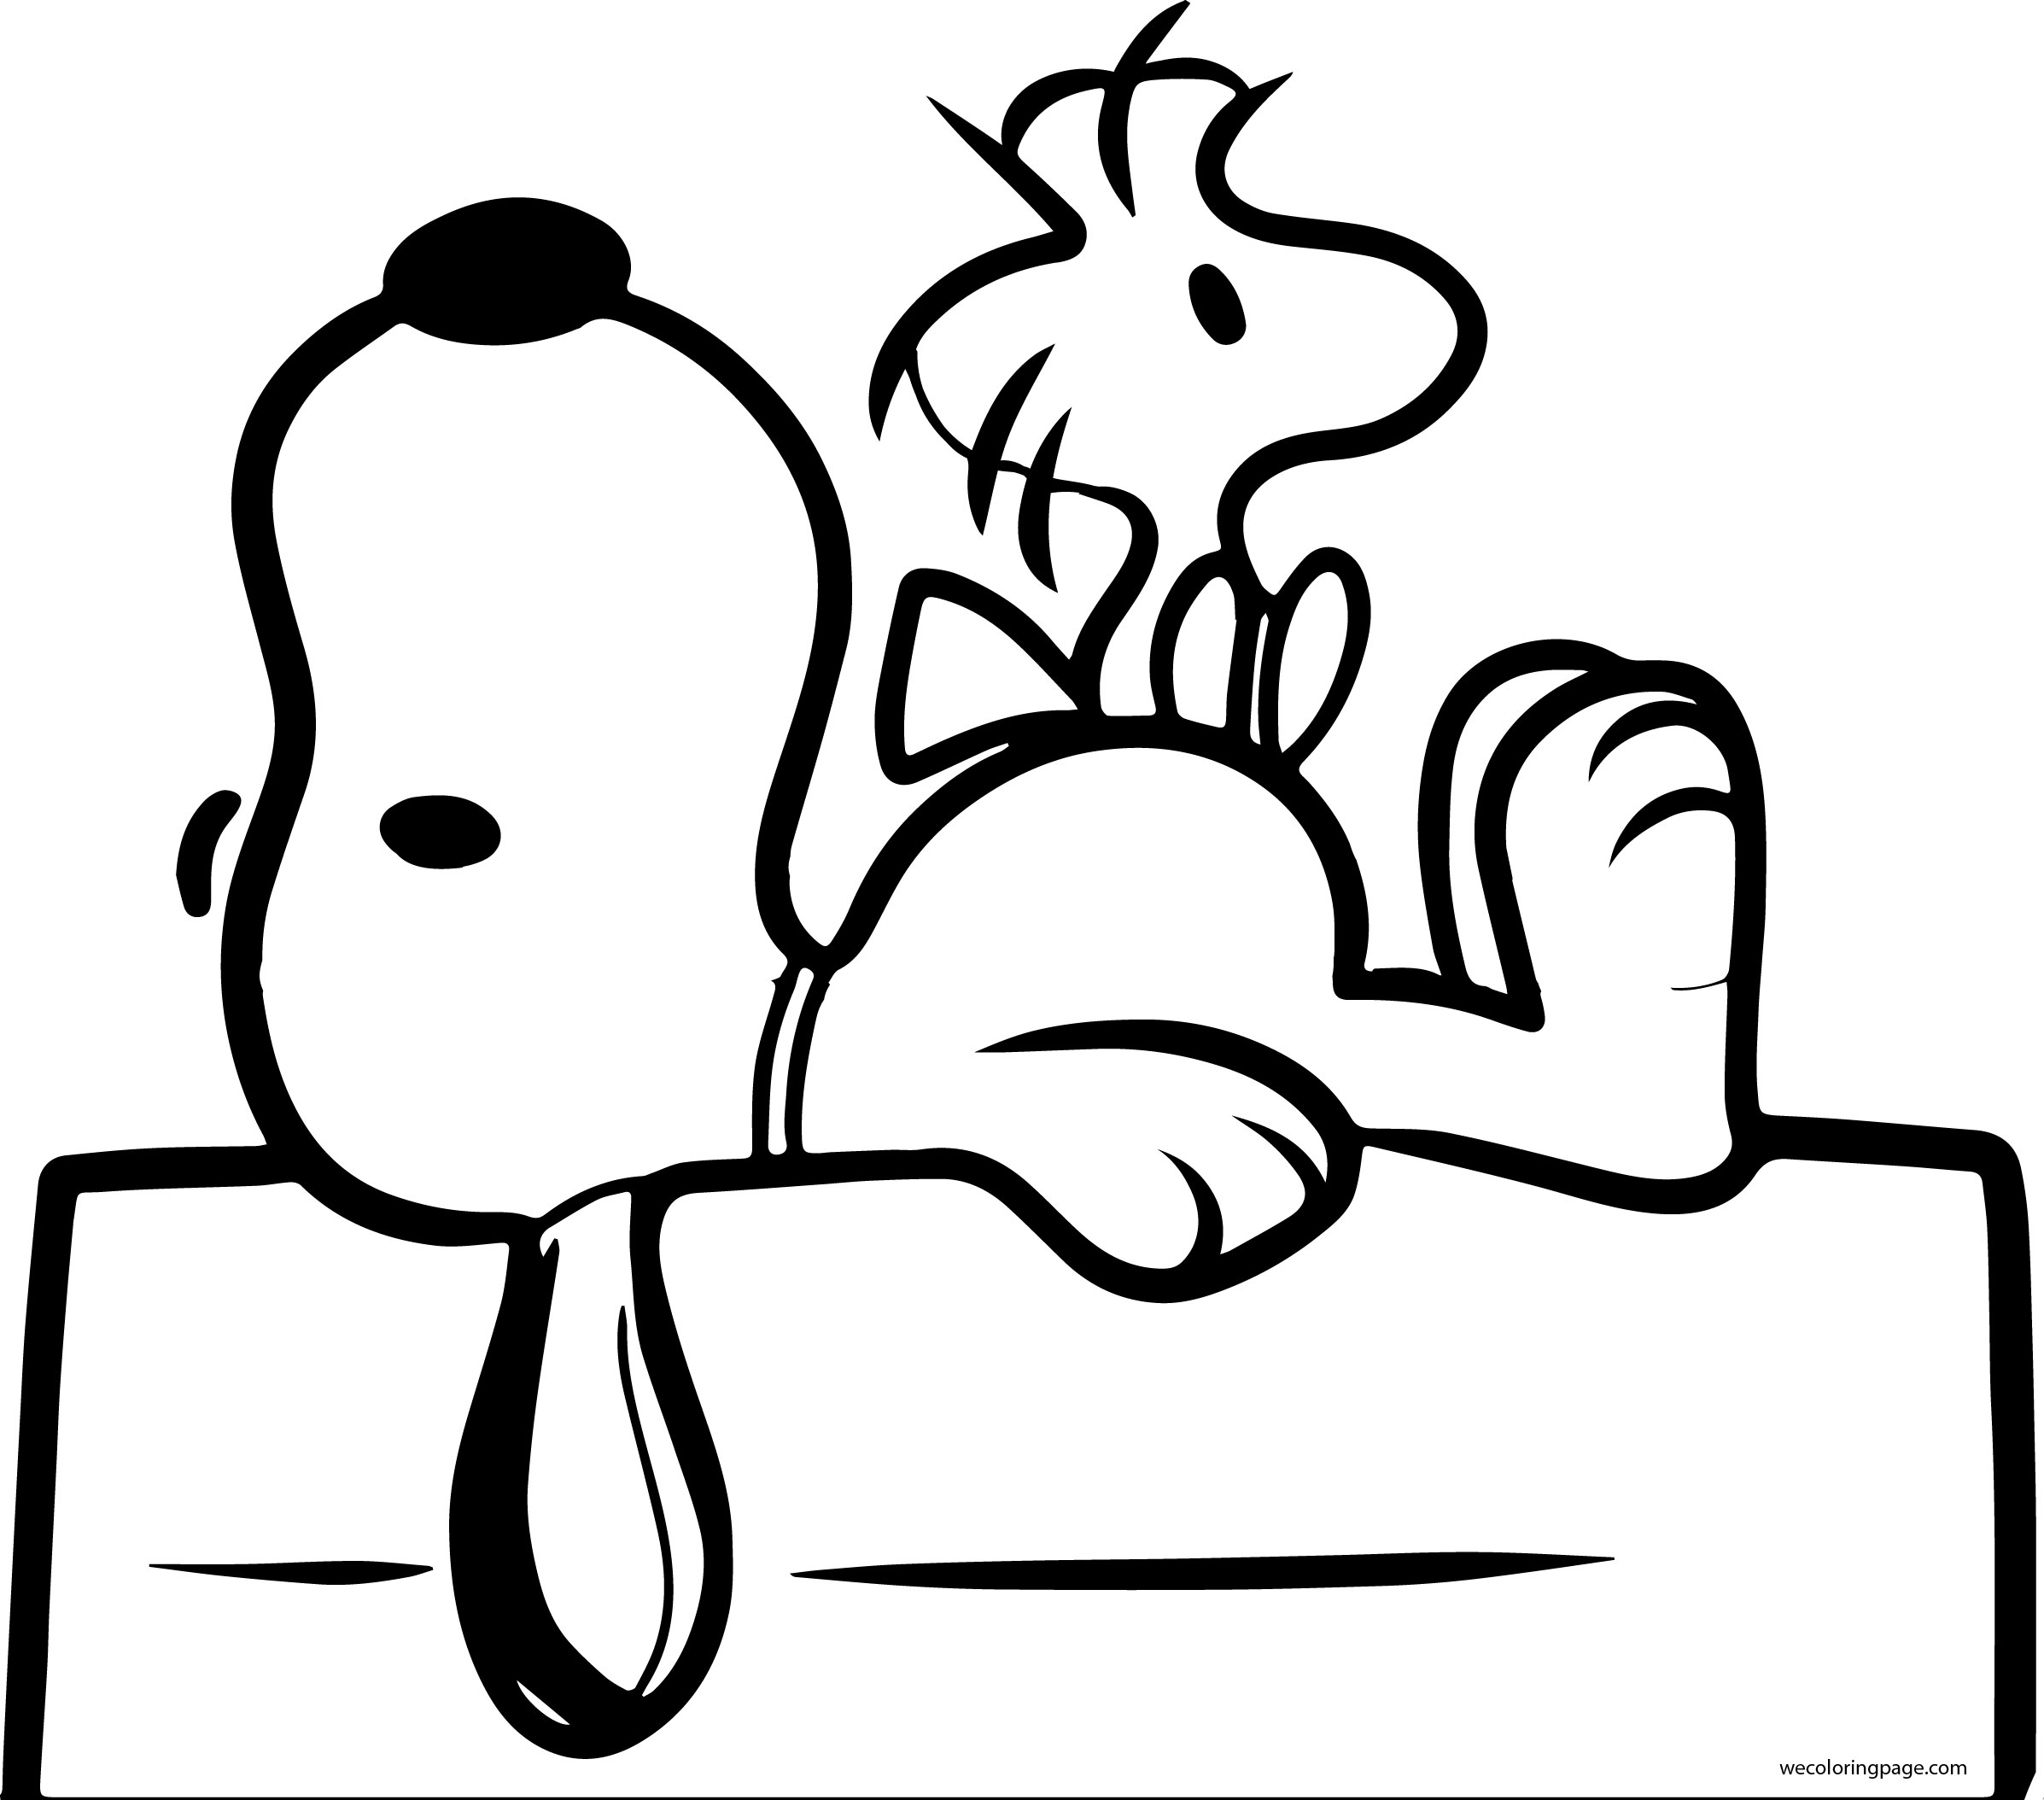 Snoopy And Woodstock Coloring Pages Perfect Snoopy And Woodstock Coloring Page Wecoloringpage